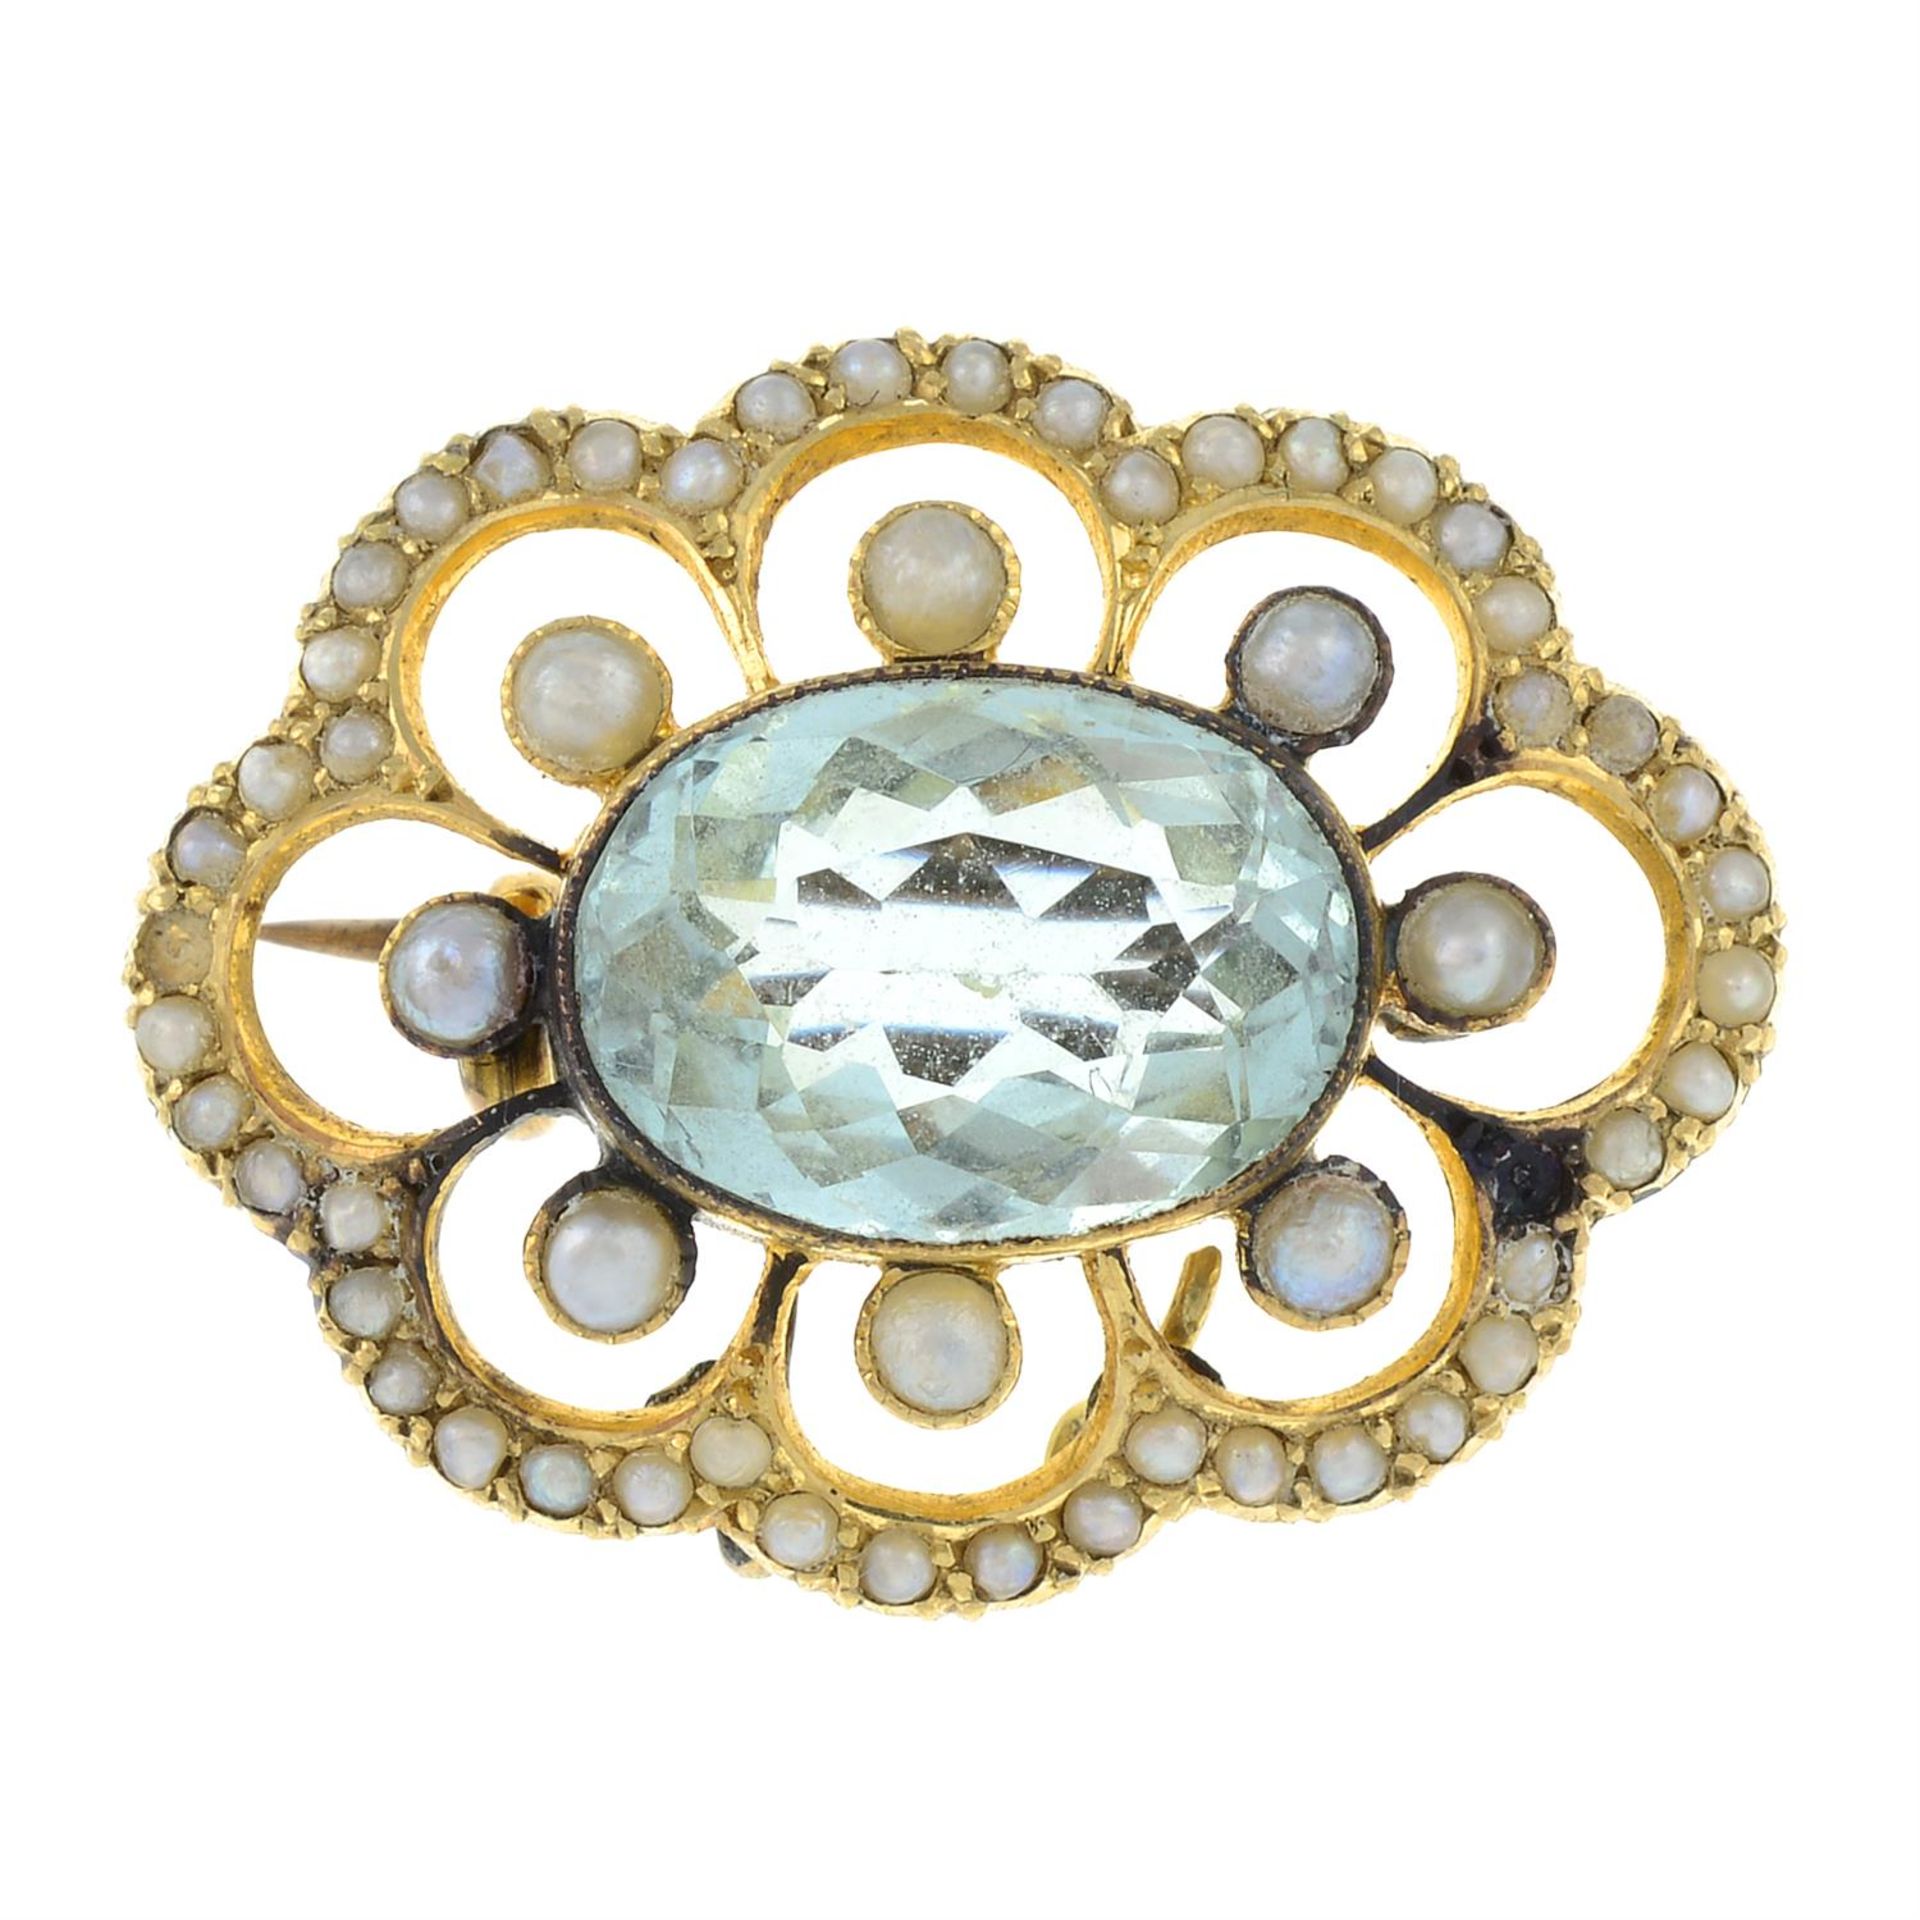 An early 20th century gold aquamarine and split pearl openwork brooch.